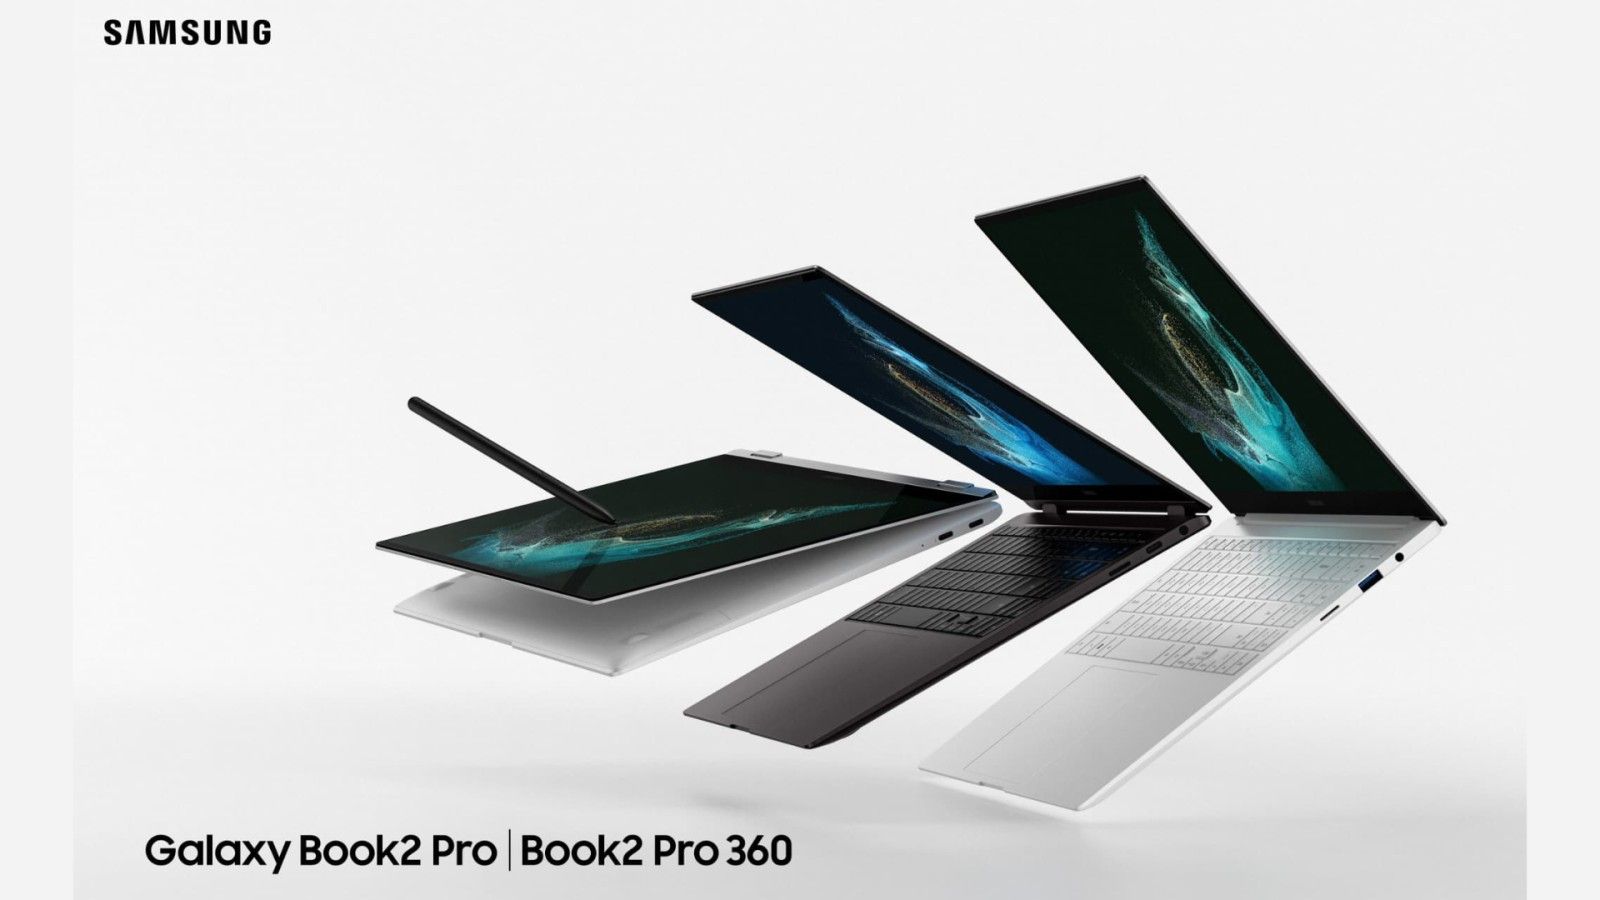 Samsung Galaxy Book 2 Pro and Book 2 Pro 360